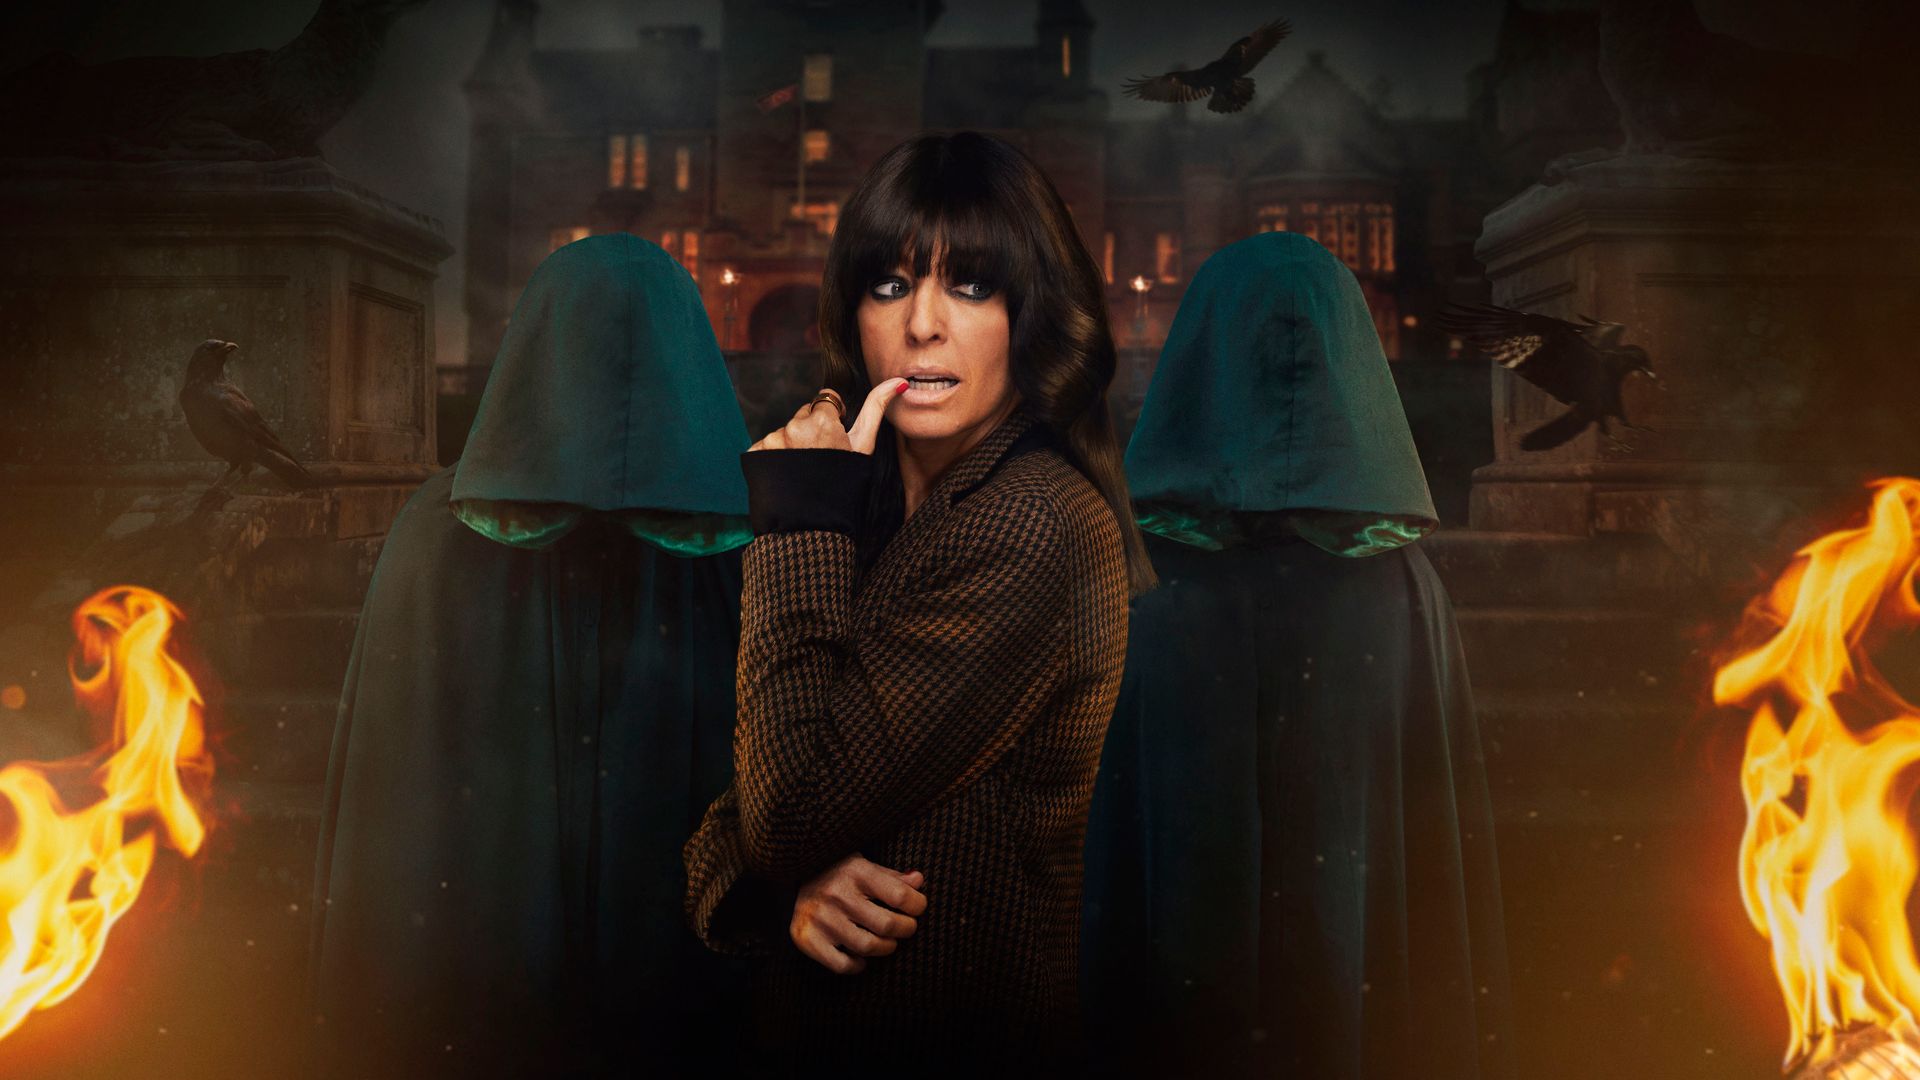 Claudia Winkleman in tweed jacket with two figures in green robes and hoods